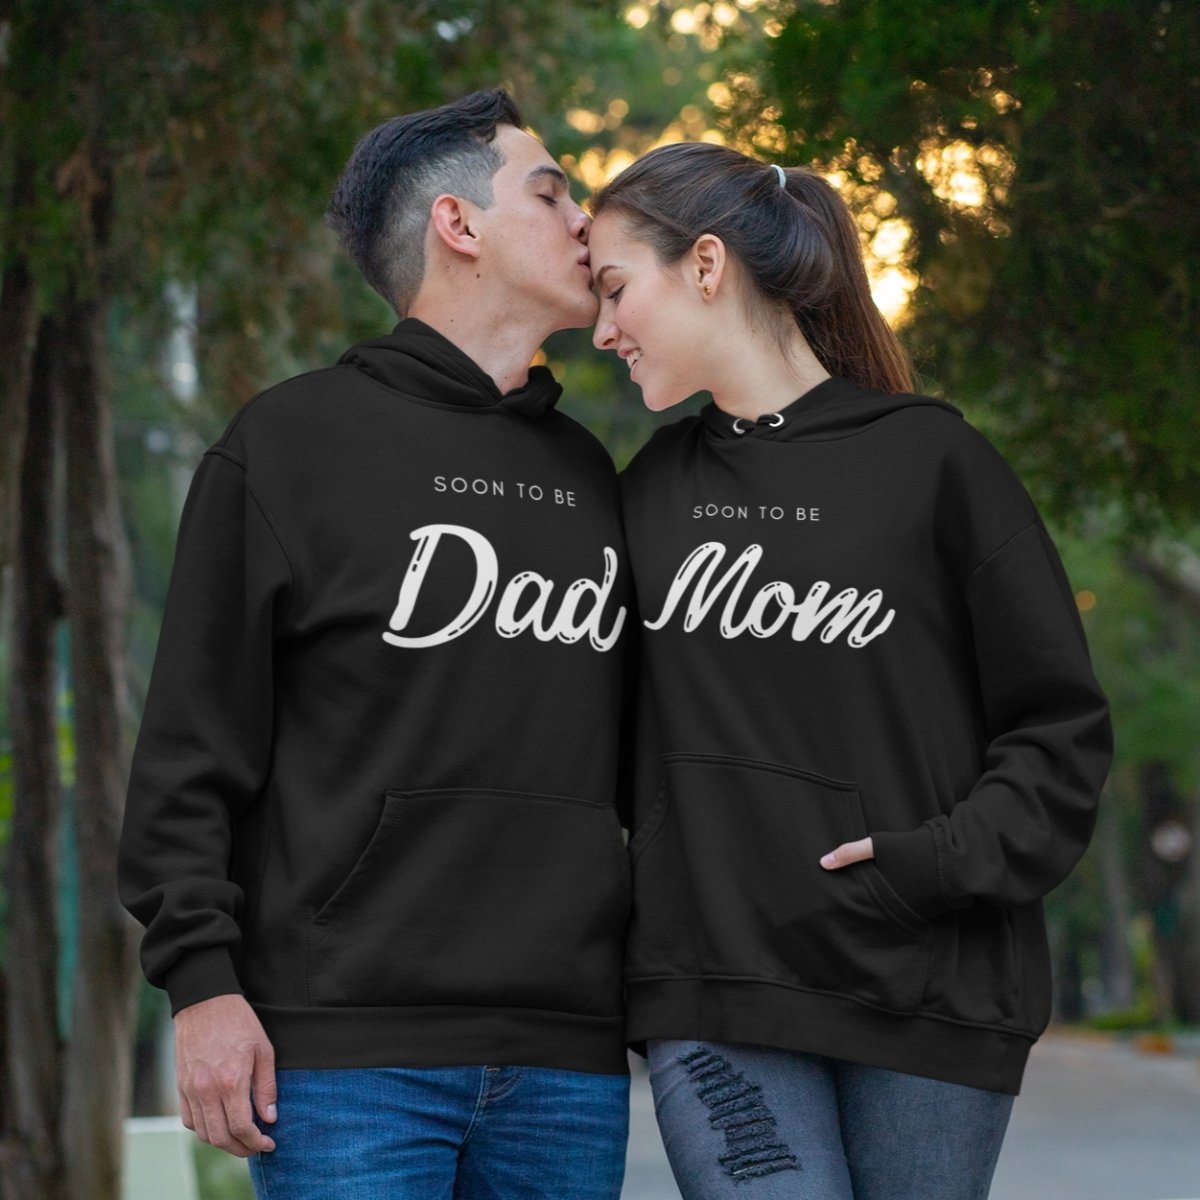 Soon To Be Mom And Dad Matching Couple Hoodies